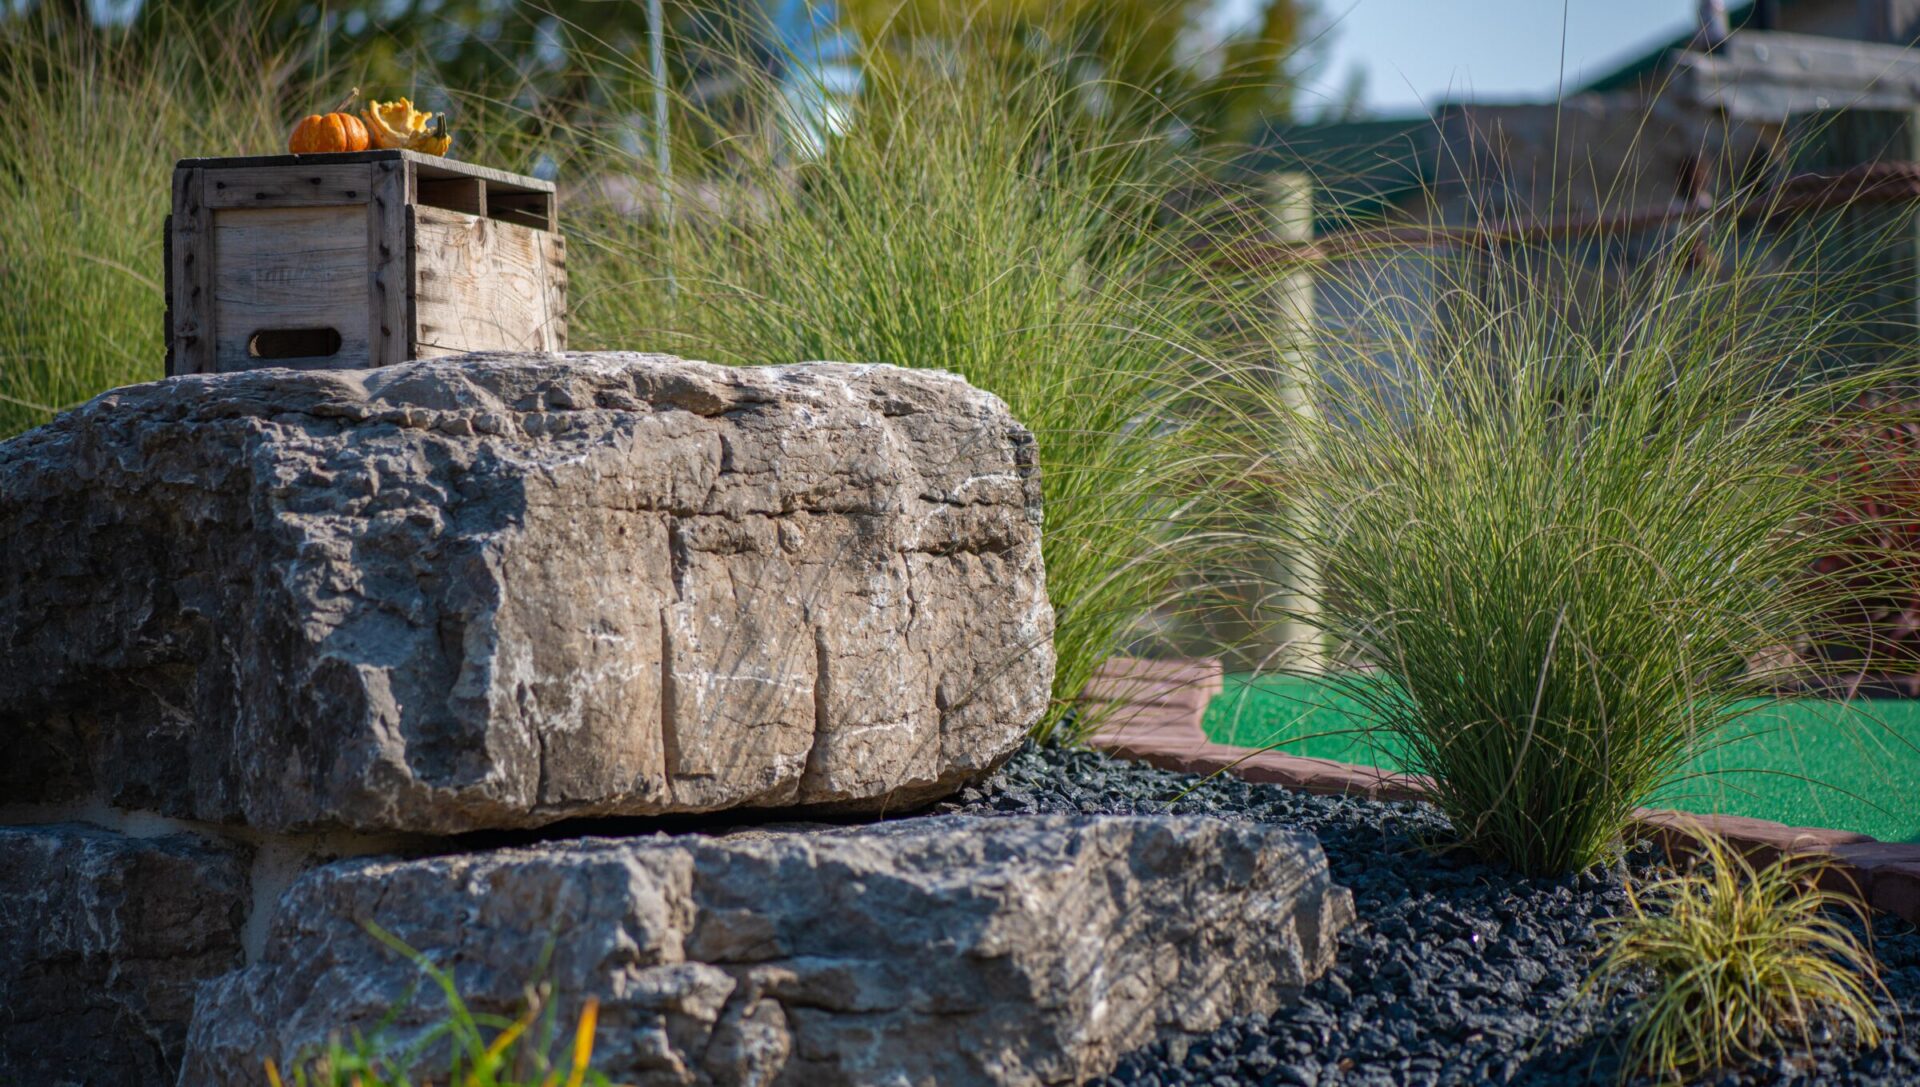 A wooden crate with small pumpkins sits atop a large rock, surrounded by ornamental grasses and black pebbles, with a hint of a mini-golf course.